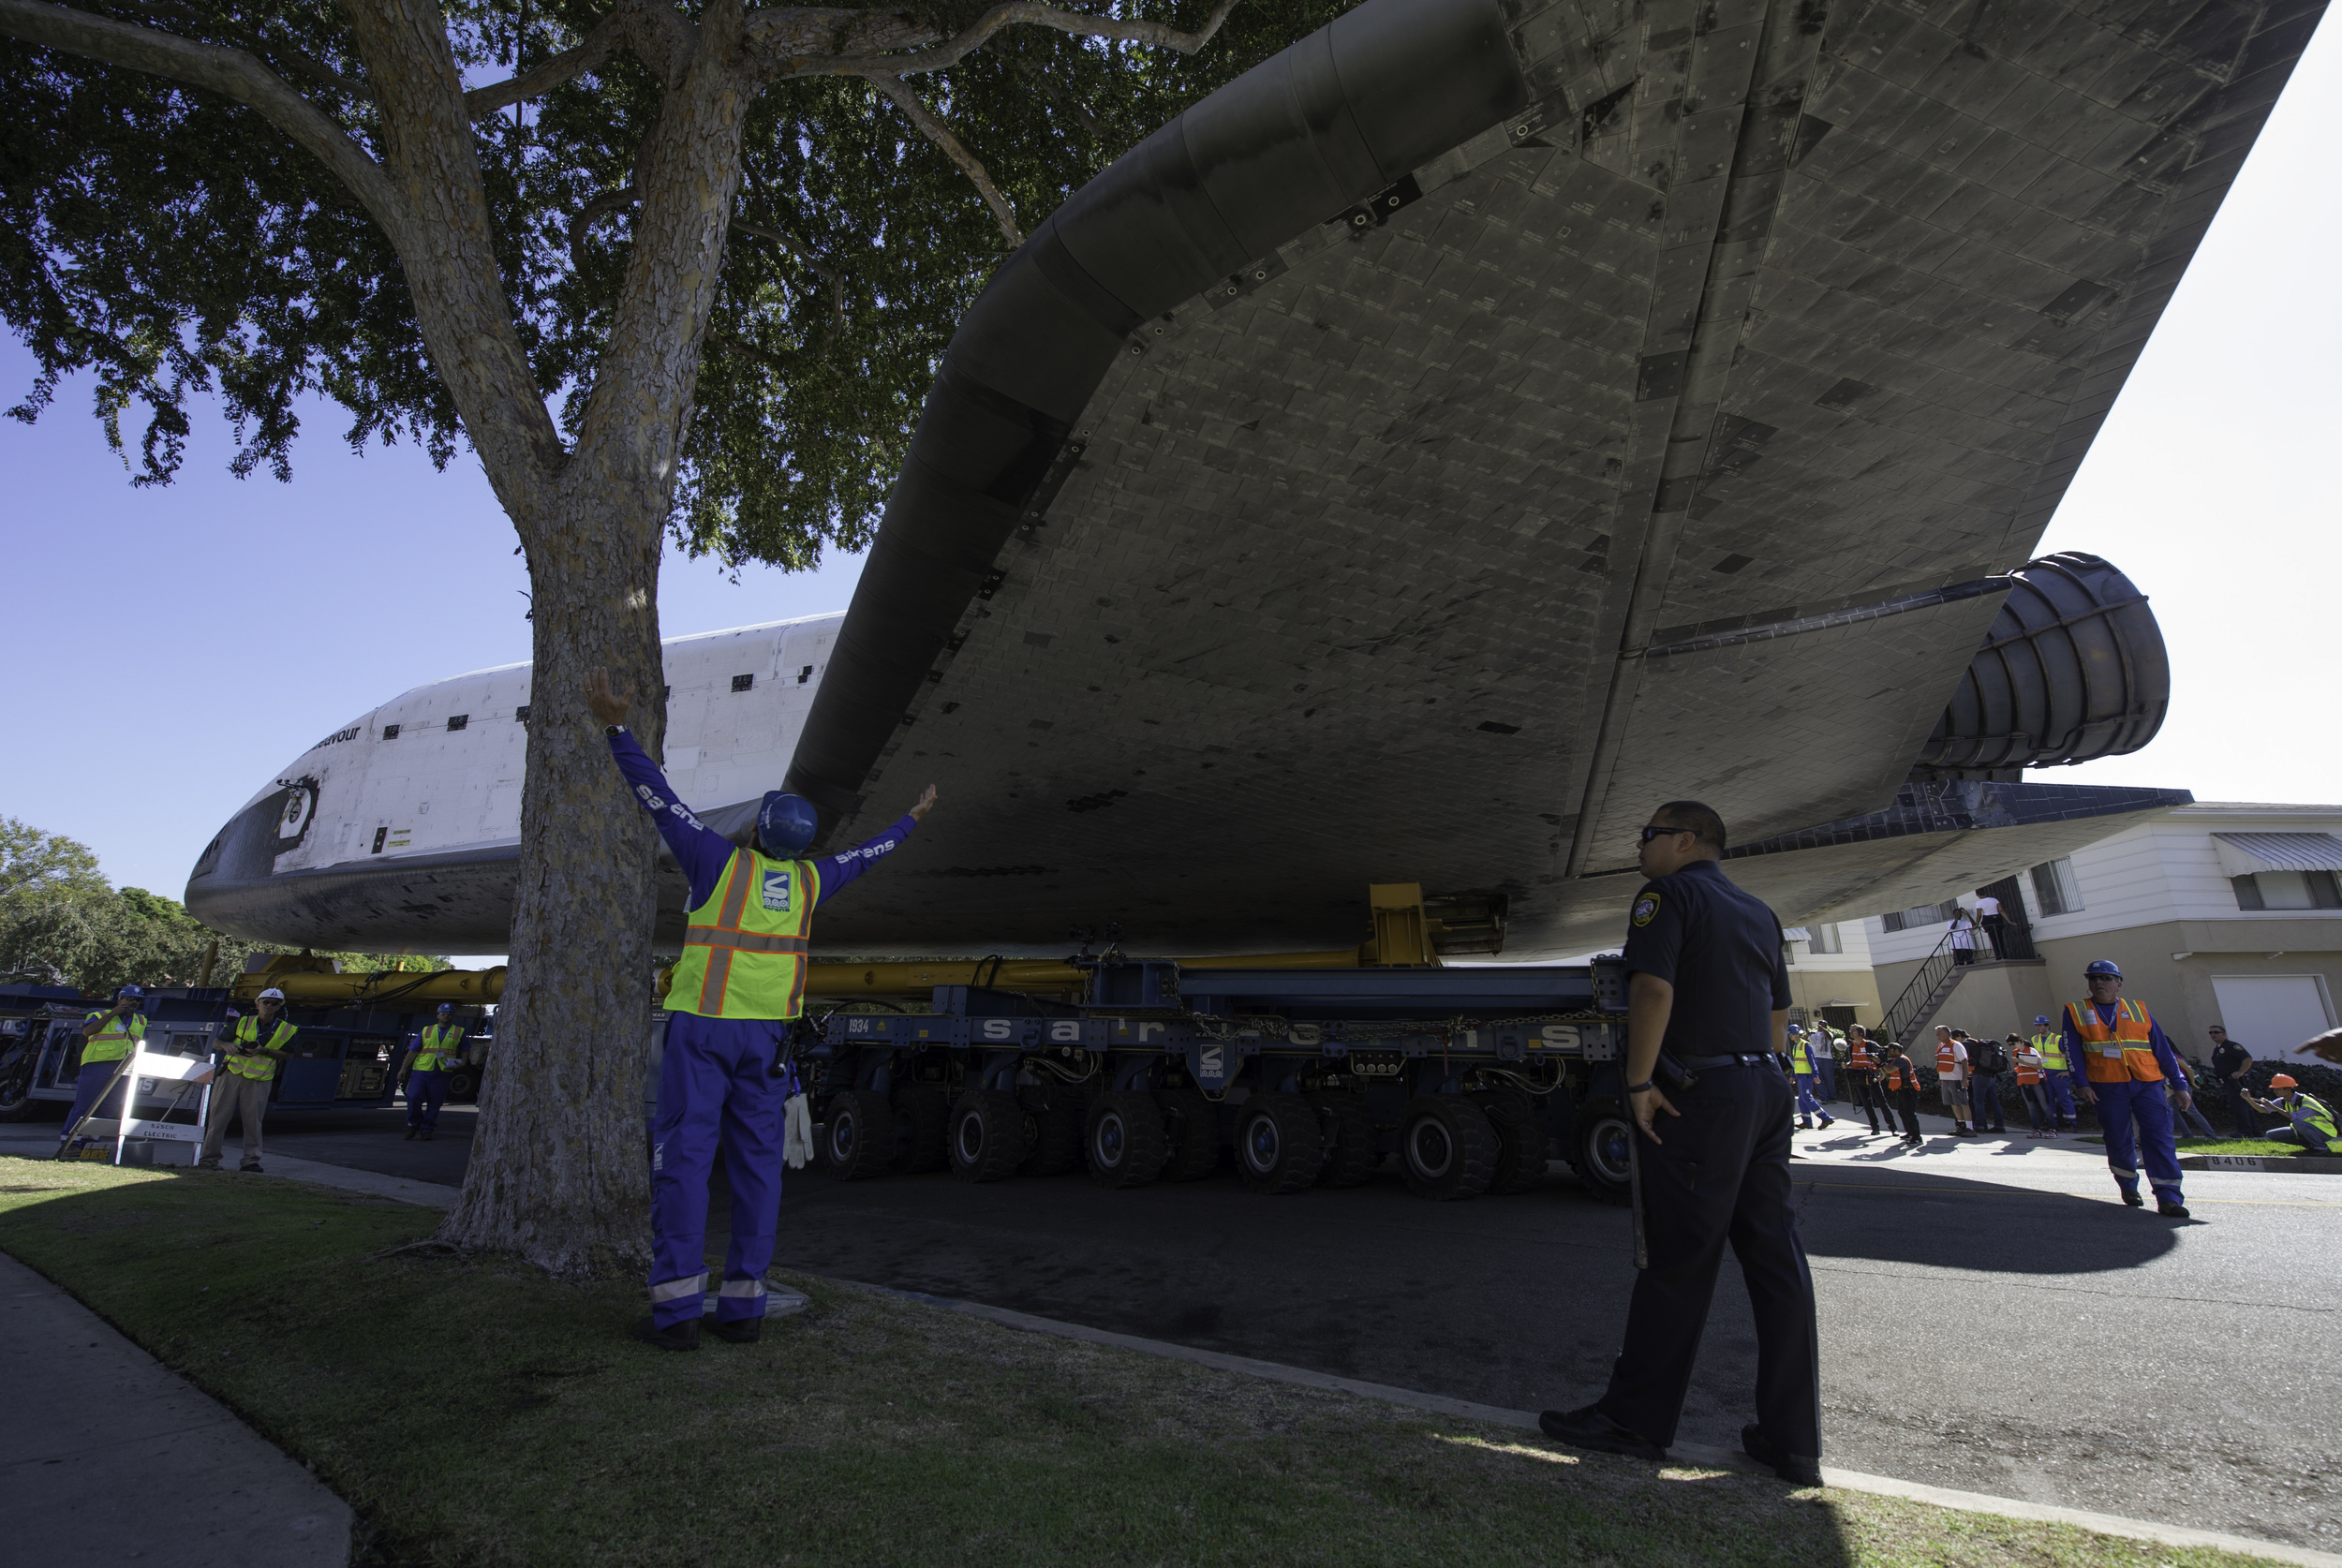  A technician for the Over Land Transporter (OLT) carrying the space shuttle Endeavour signals how much room is available between a tree and the orbiter’s wing, Saturday, Oct. 13, 2012, as it maneuvers its way through the streets of Inglewood, Calif.